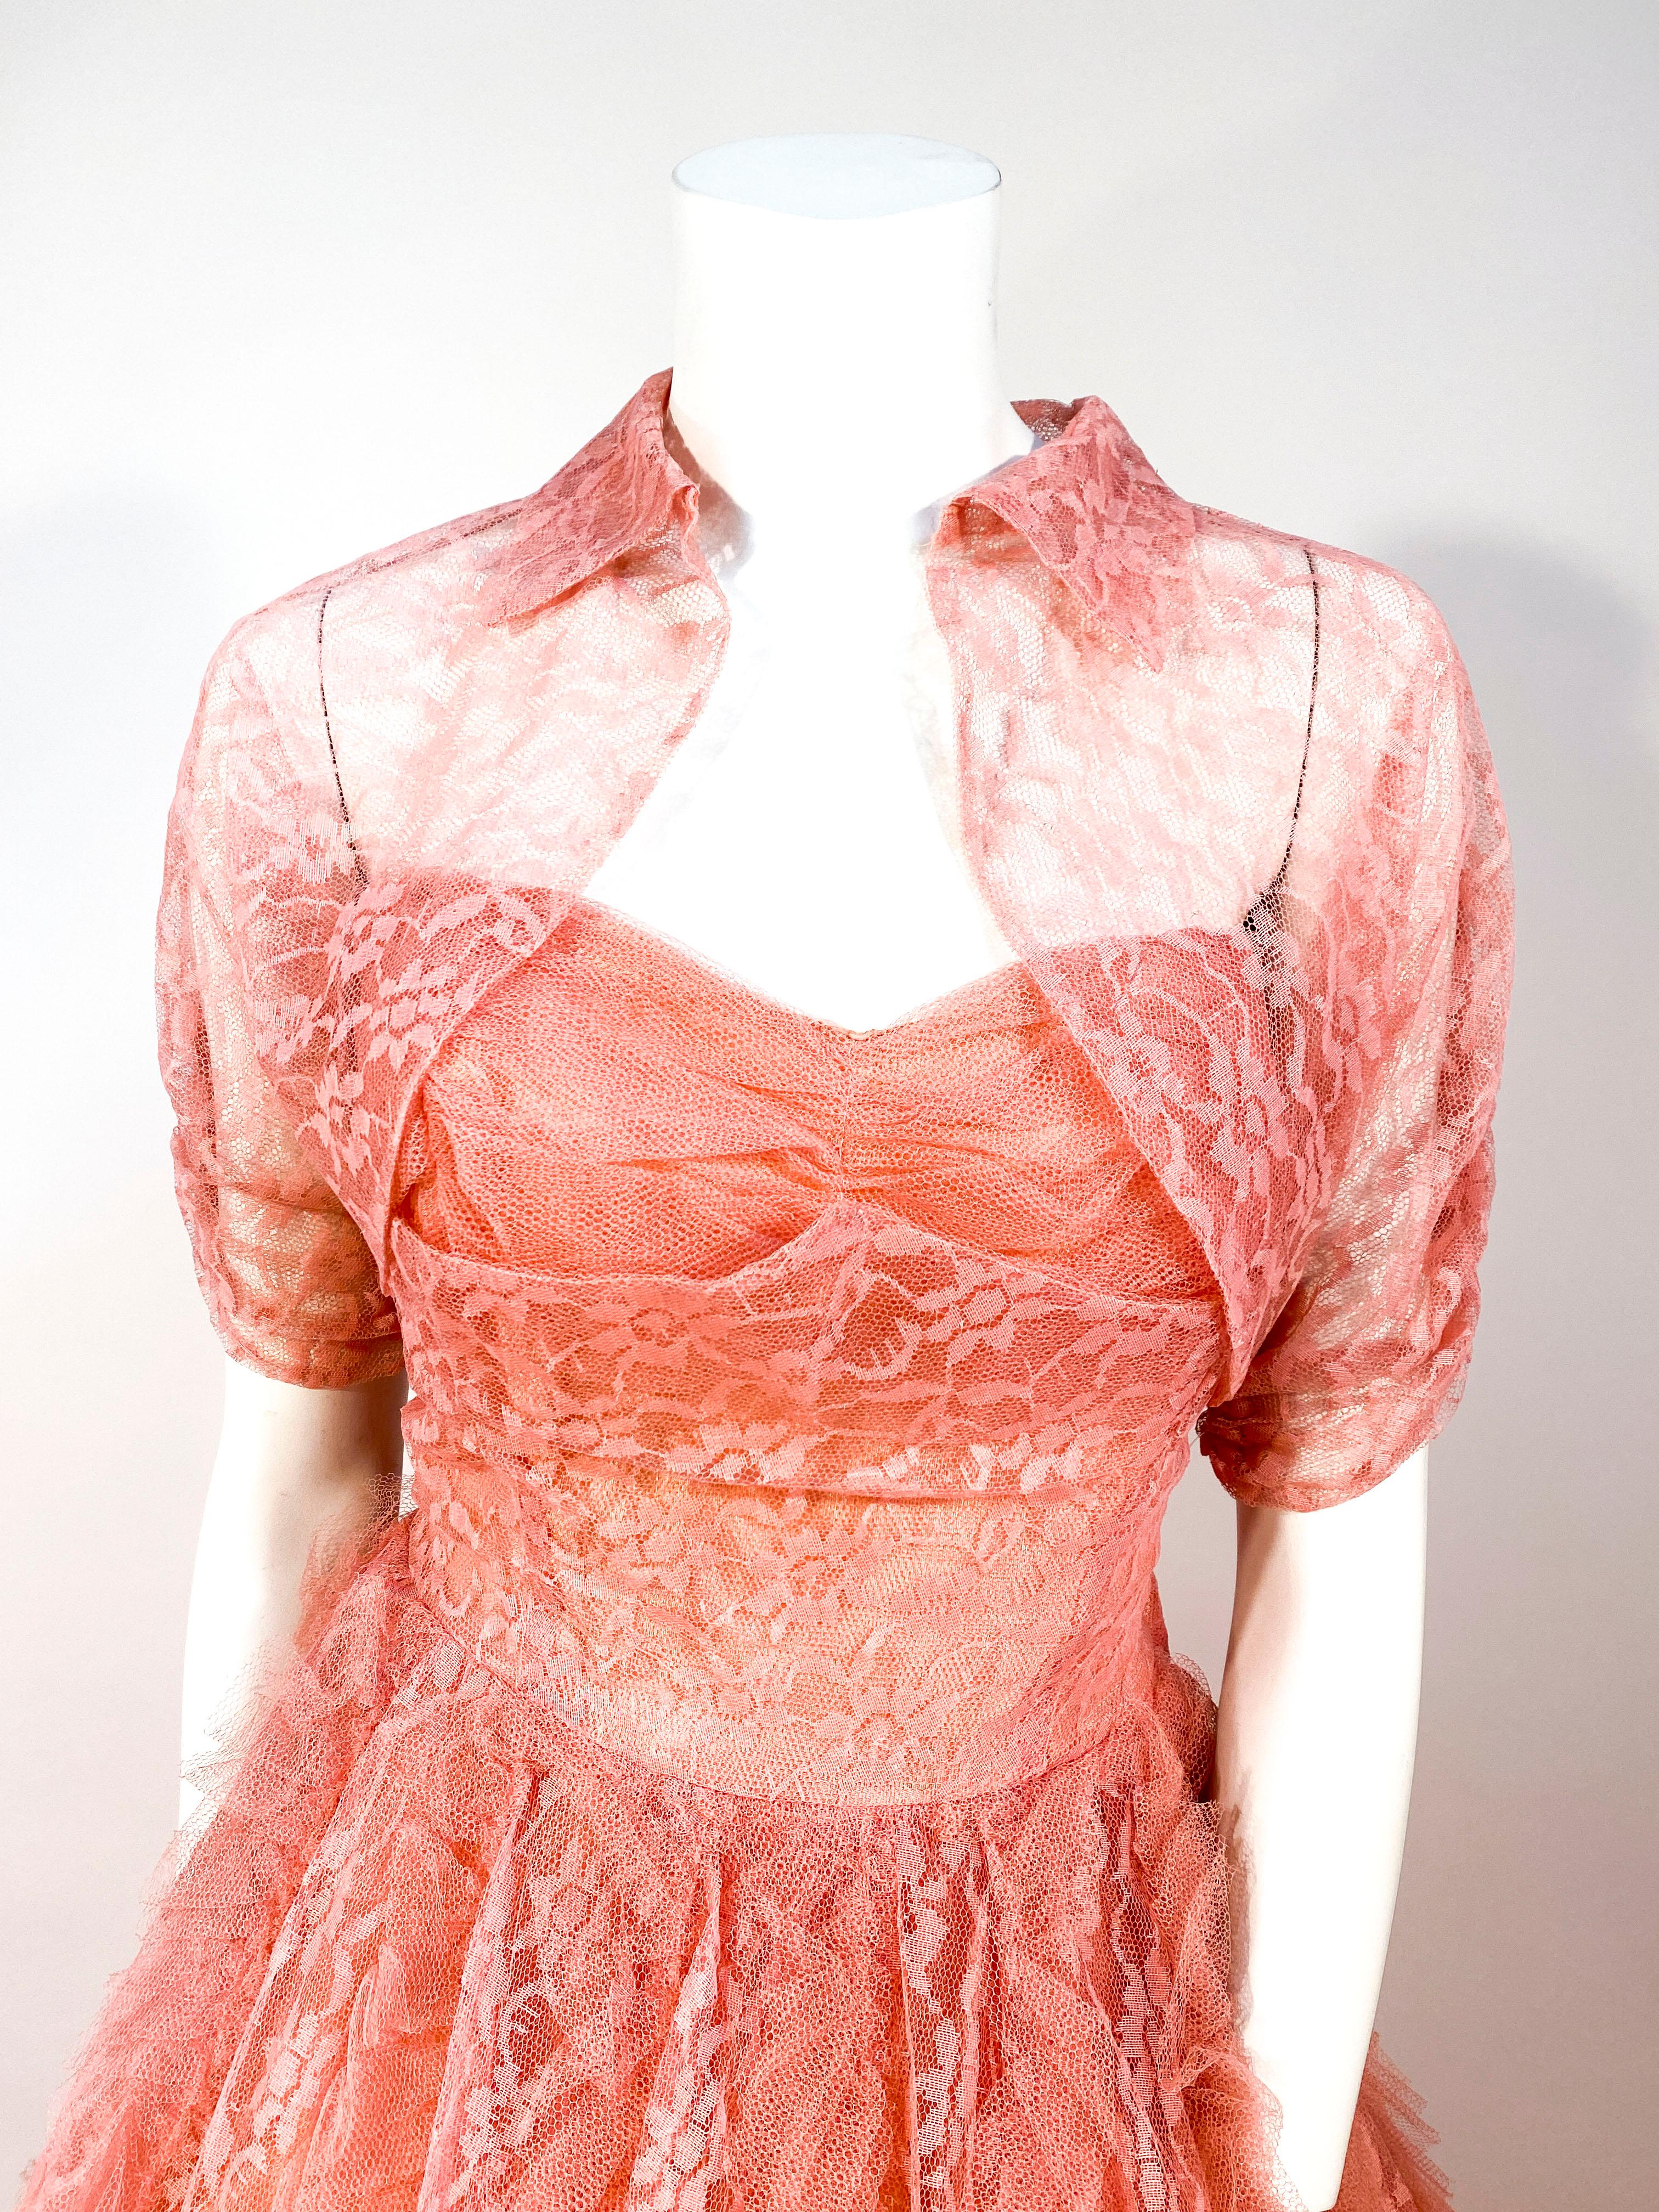 1950s coral lace and tulle evening dress or ball gown with matching bolero. The gown has a full-length skirt made of paneled lace and ruffles of tulle. The bodice is strapless with ruching over the bust. The bodice is entirely lined in satin and